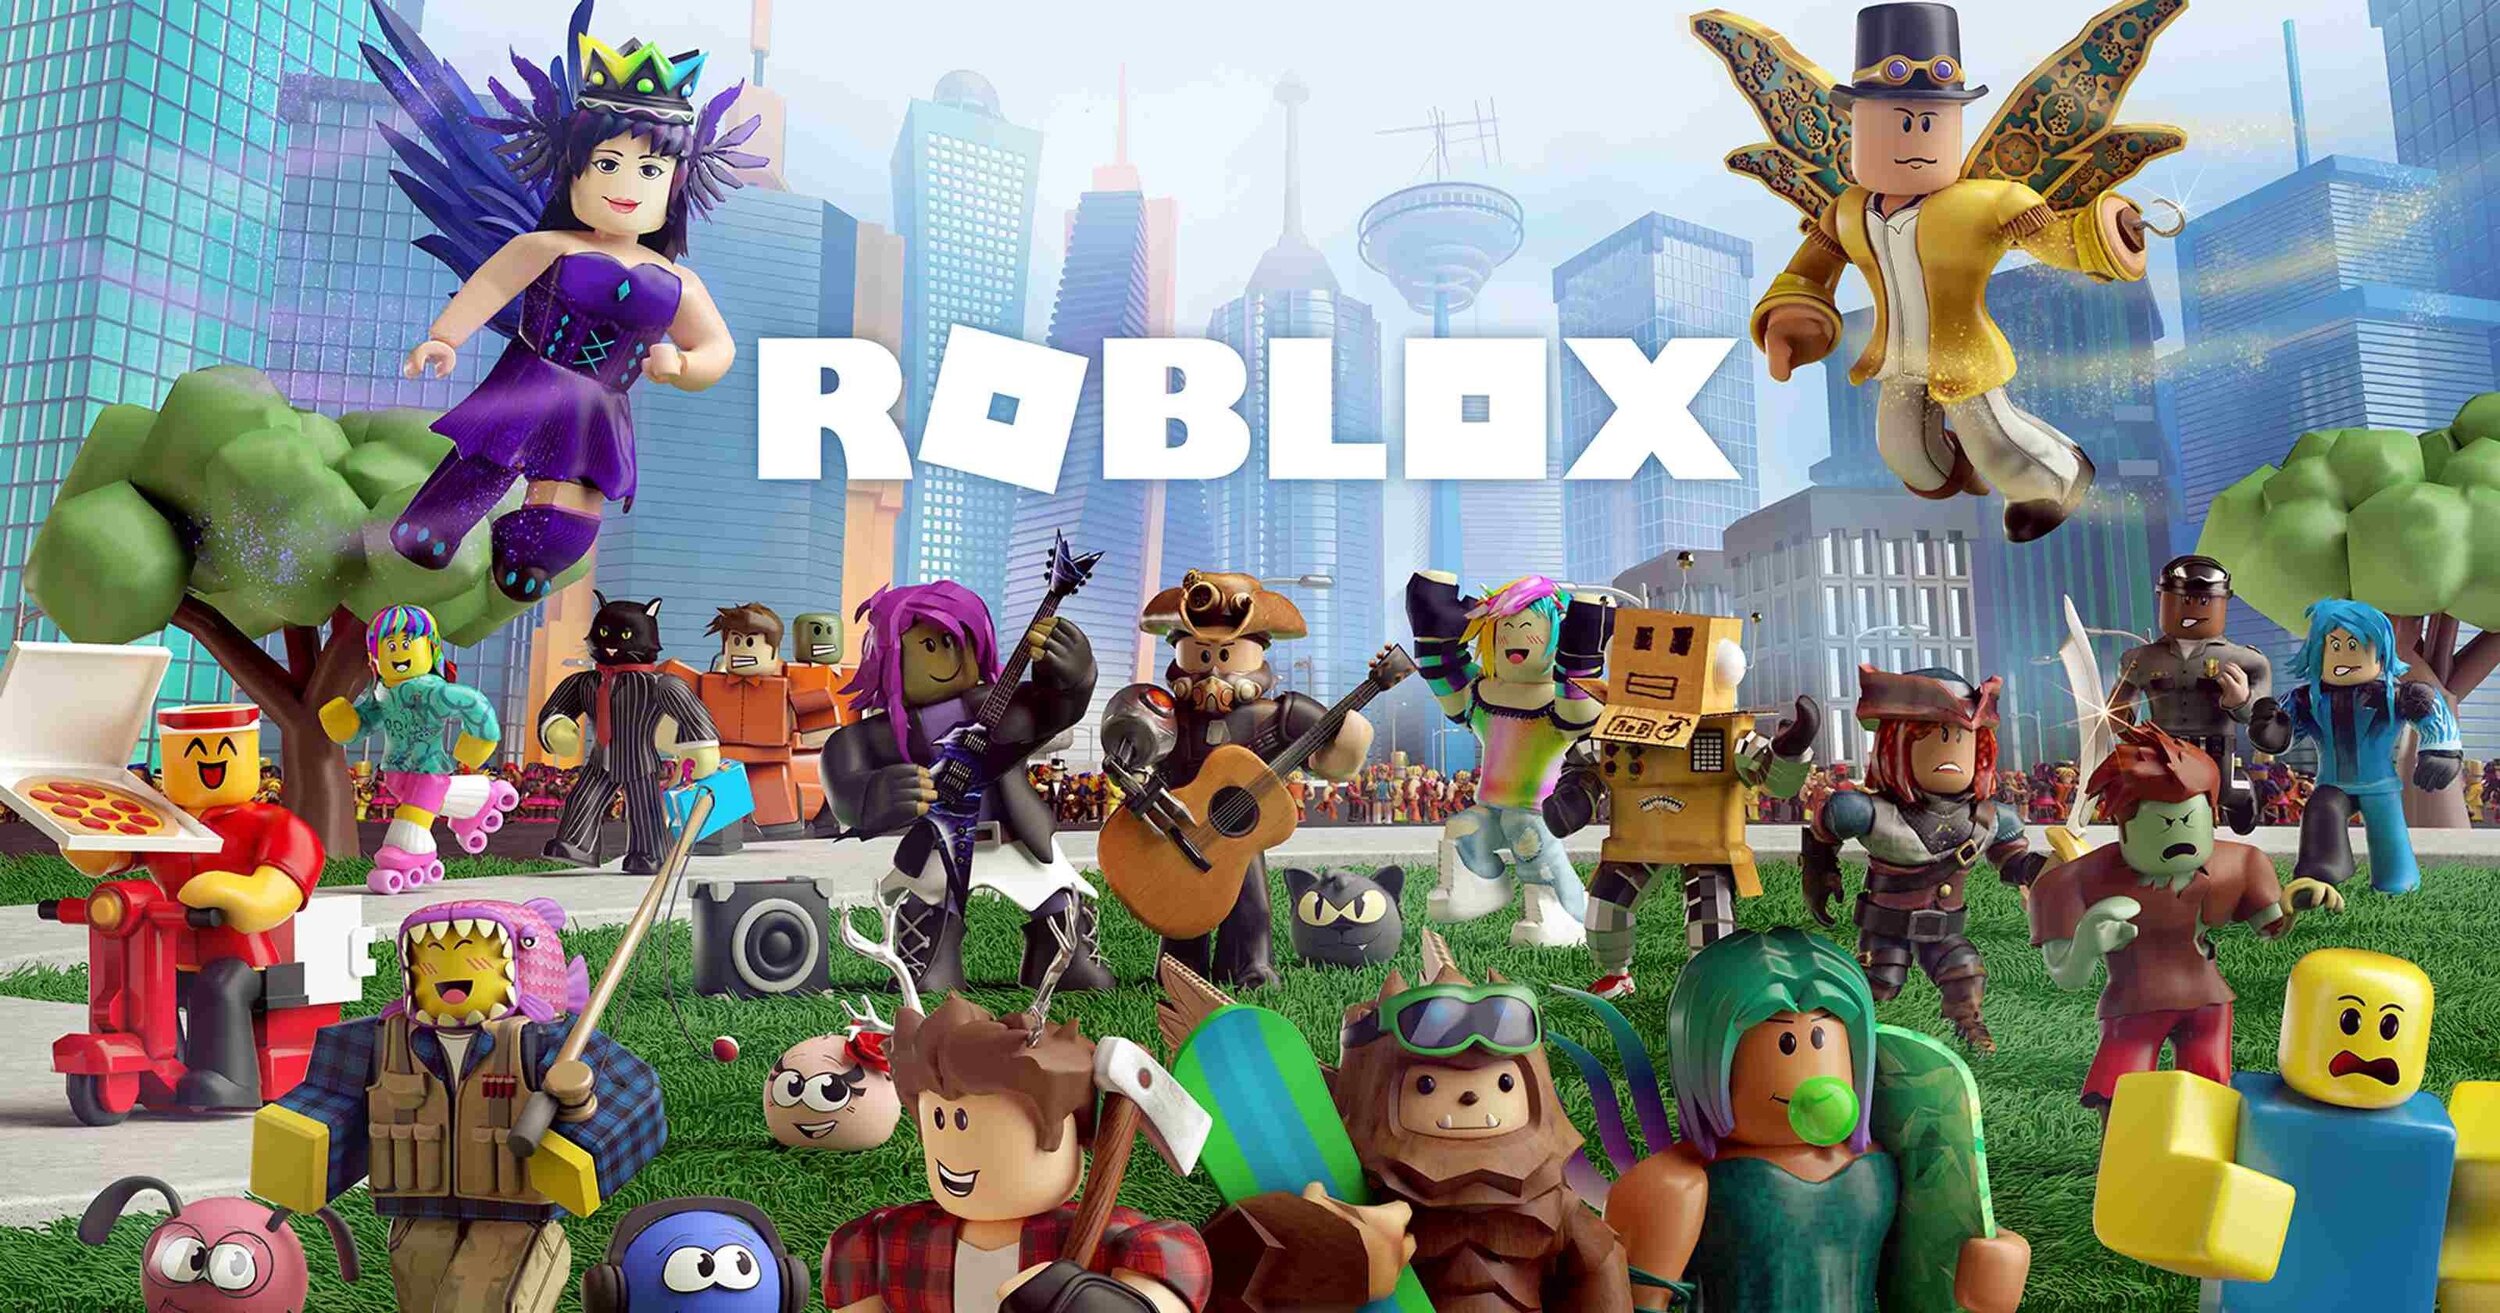 Roblox shares opened 15% up on Tuesday: here's the catalyst